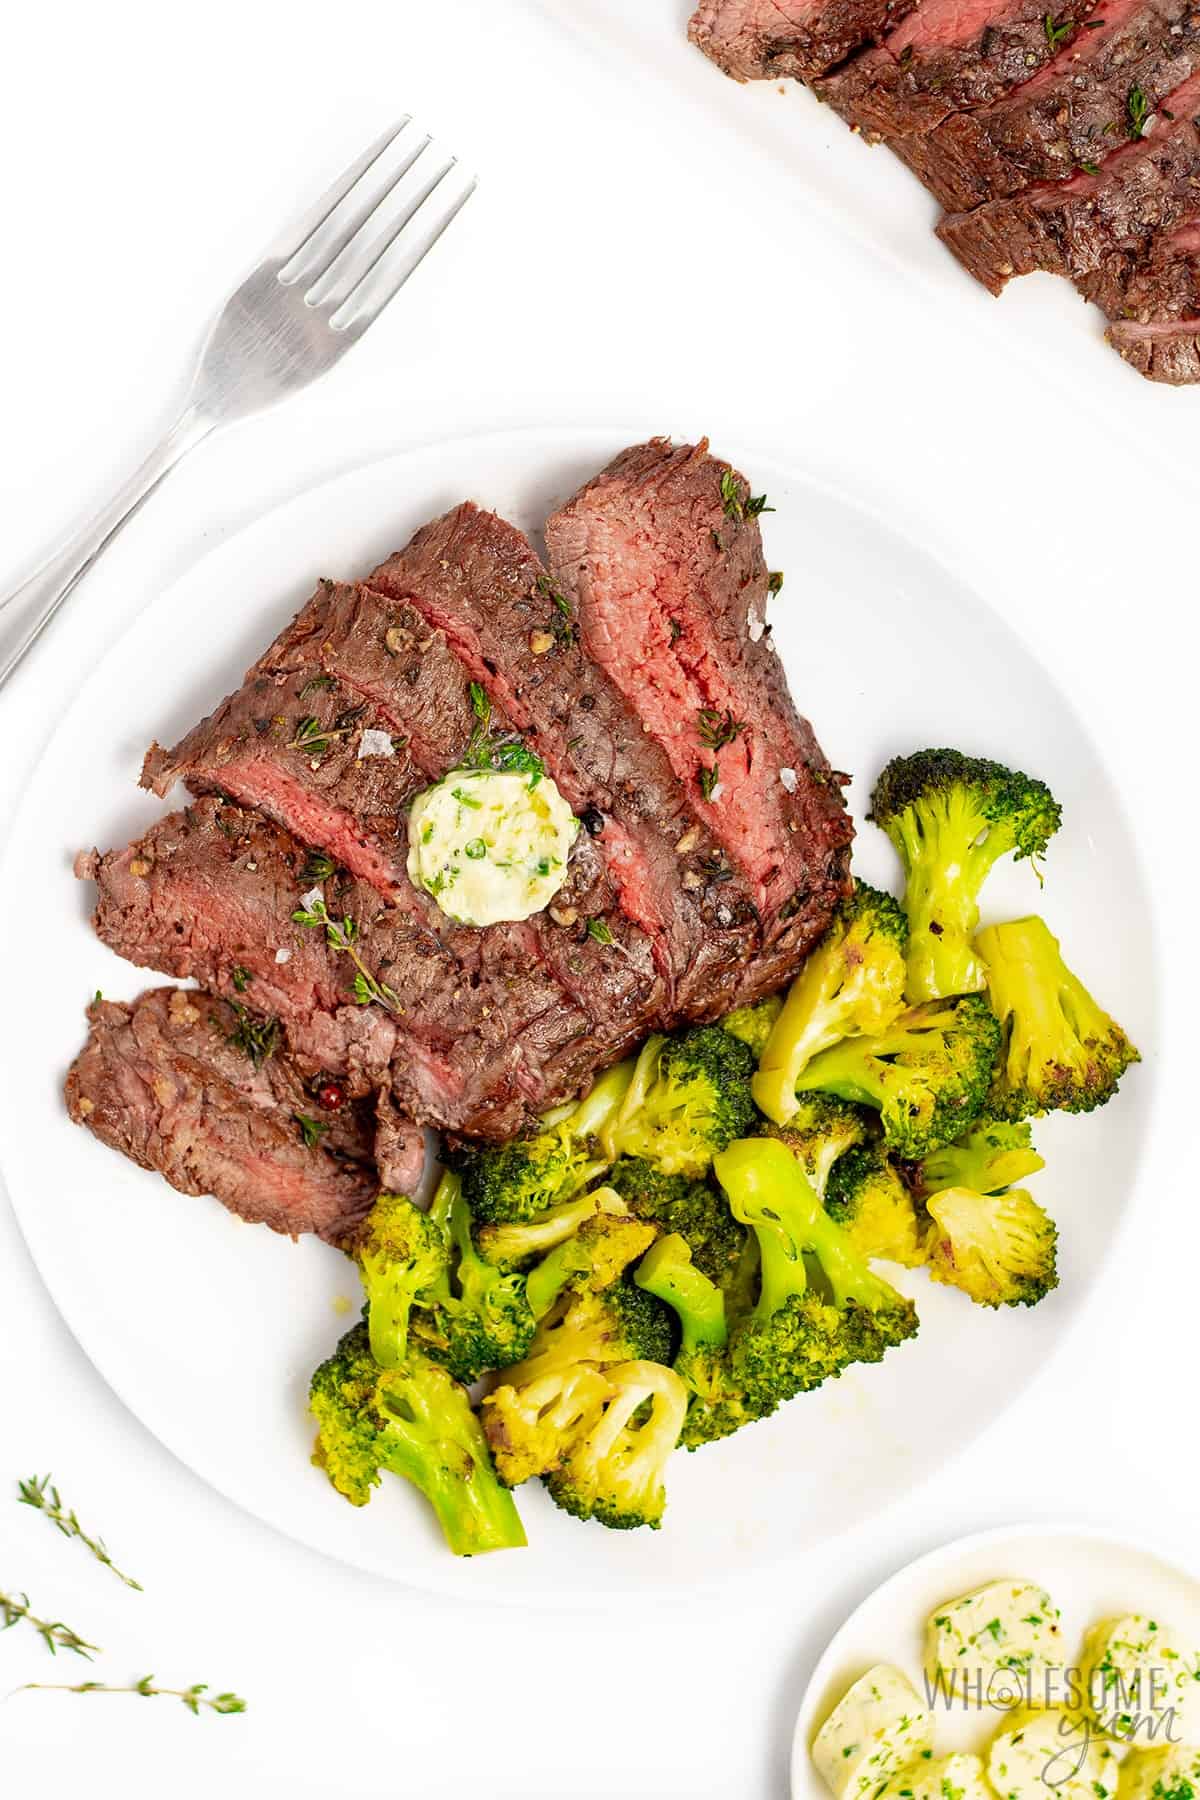 London broil steak on a plate with broccoli